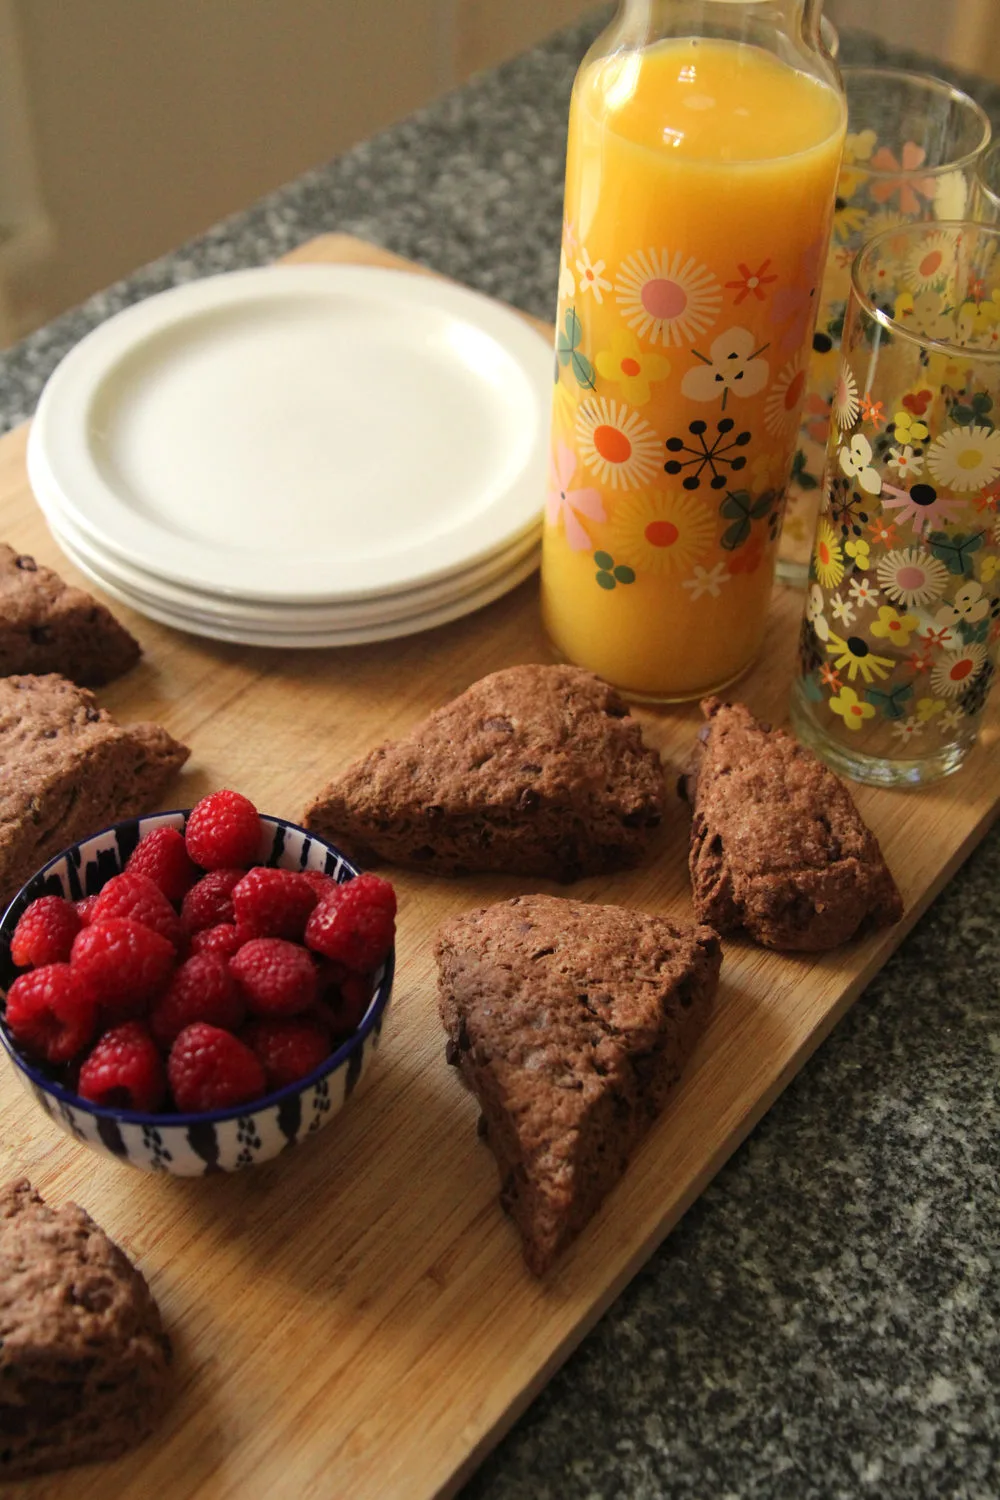 double chocolate scones recipe shown with a glass pitcher of orange juice, a bowl of raspberries and a stock of white plates on a wooden cutting board.